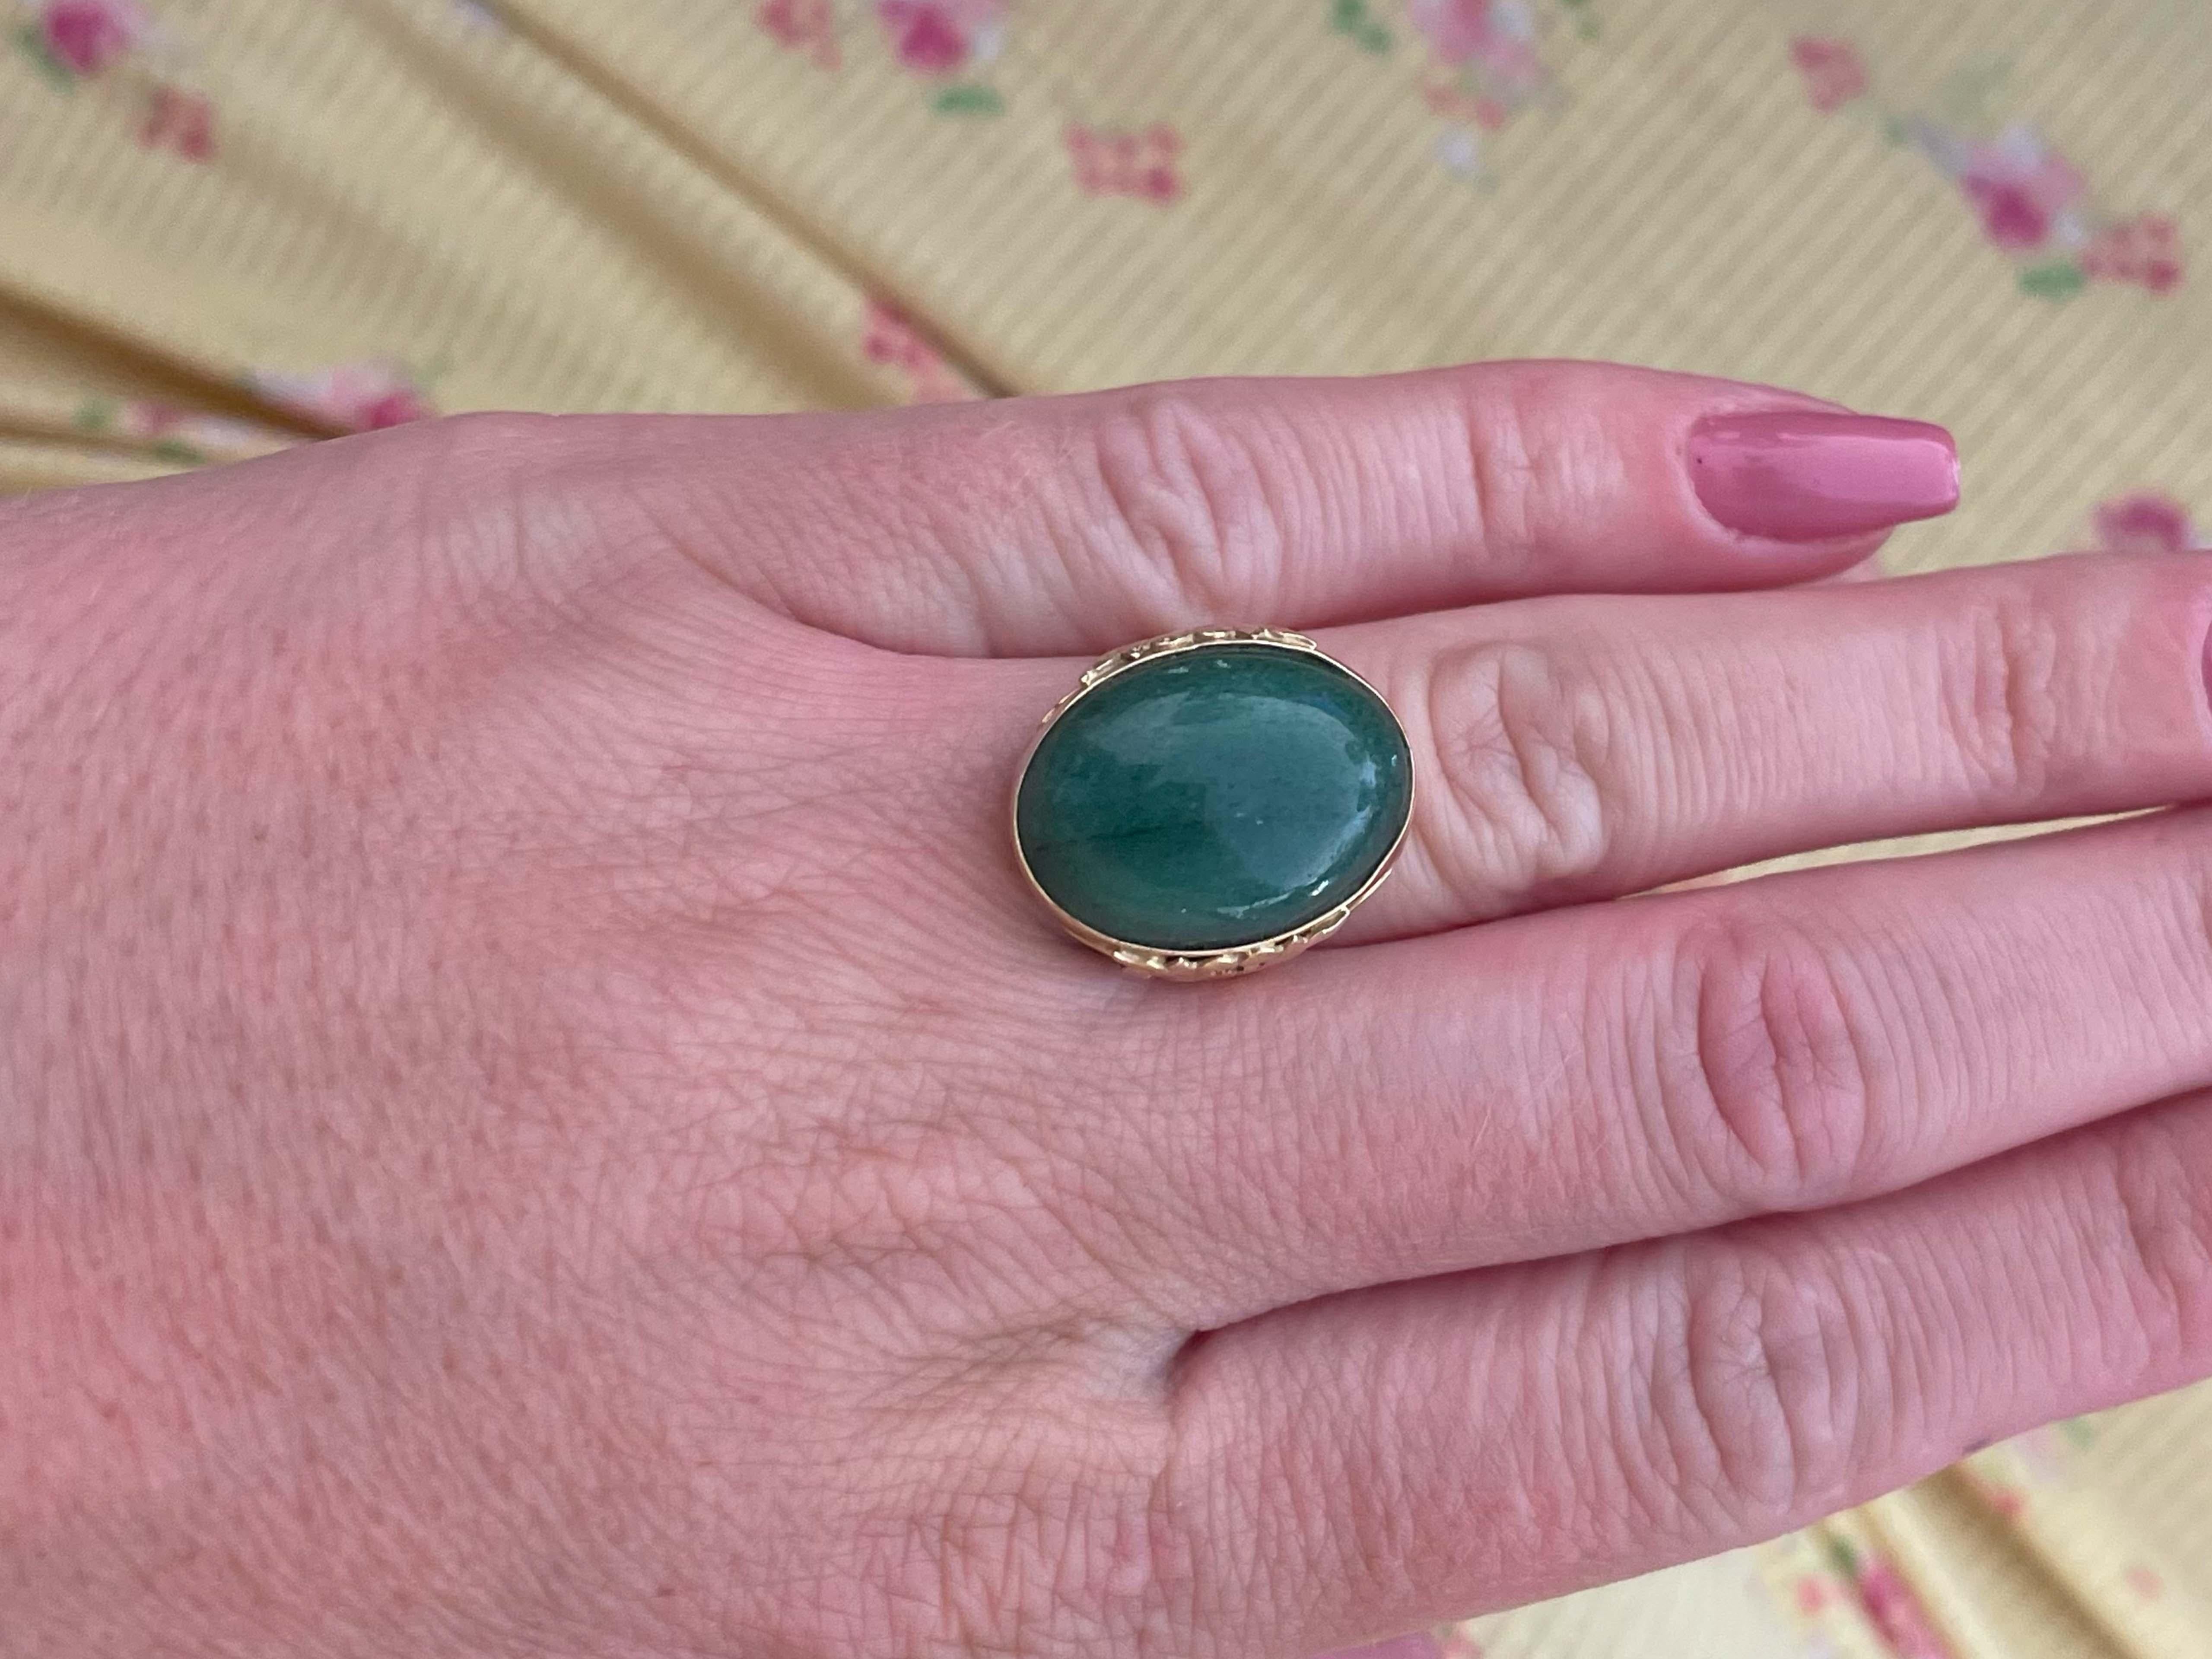 Ring Specifications:

Designer: Ming's

Metal: 14k Yellow Gold

Jade: Green Jade

​Jade Measurements: 19.9 mm x 15.2 mm x 5.3 mm

Total Weight: 6.0 Grams

Ring Size: 6 (resizable)

Stamped: 